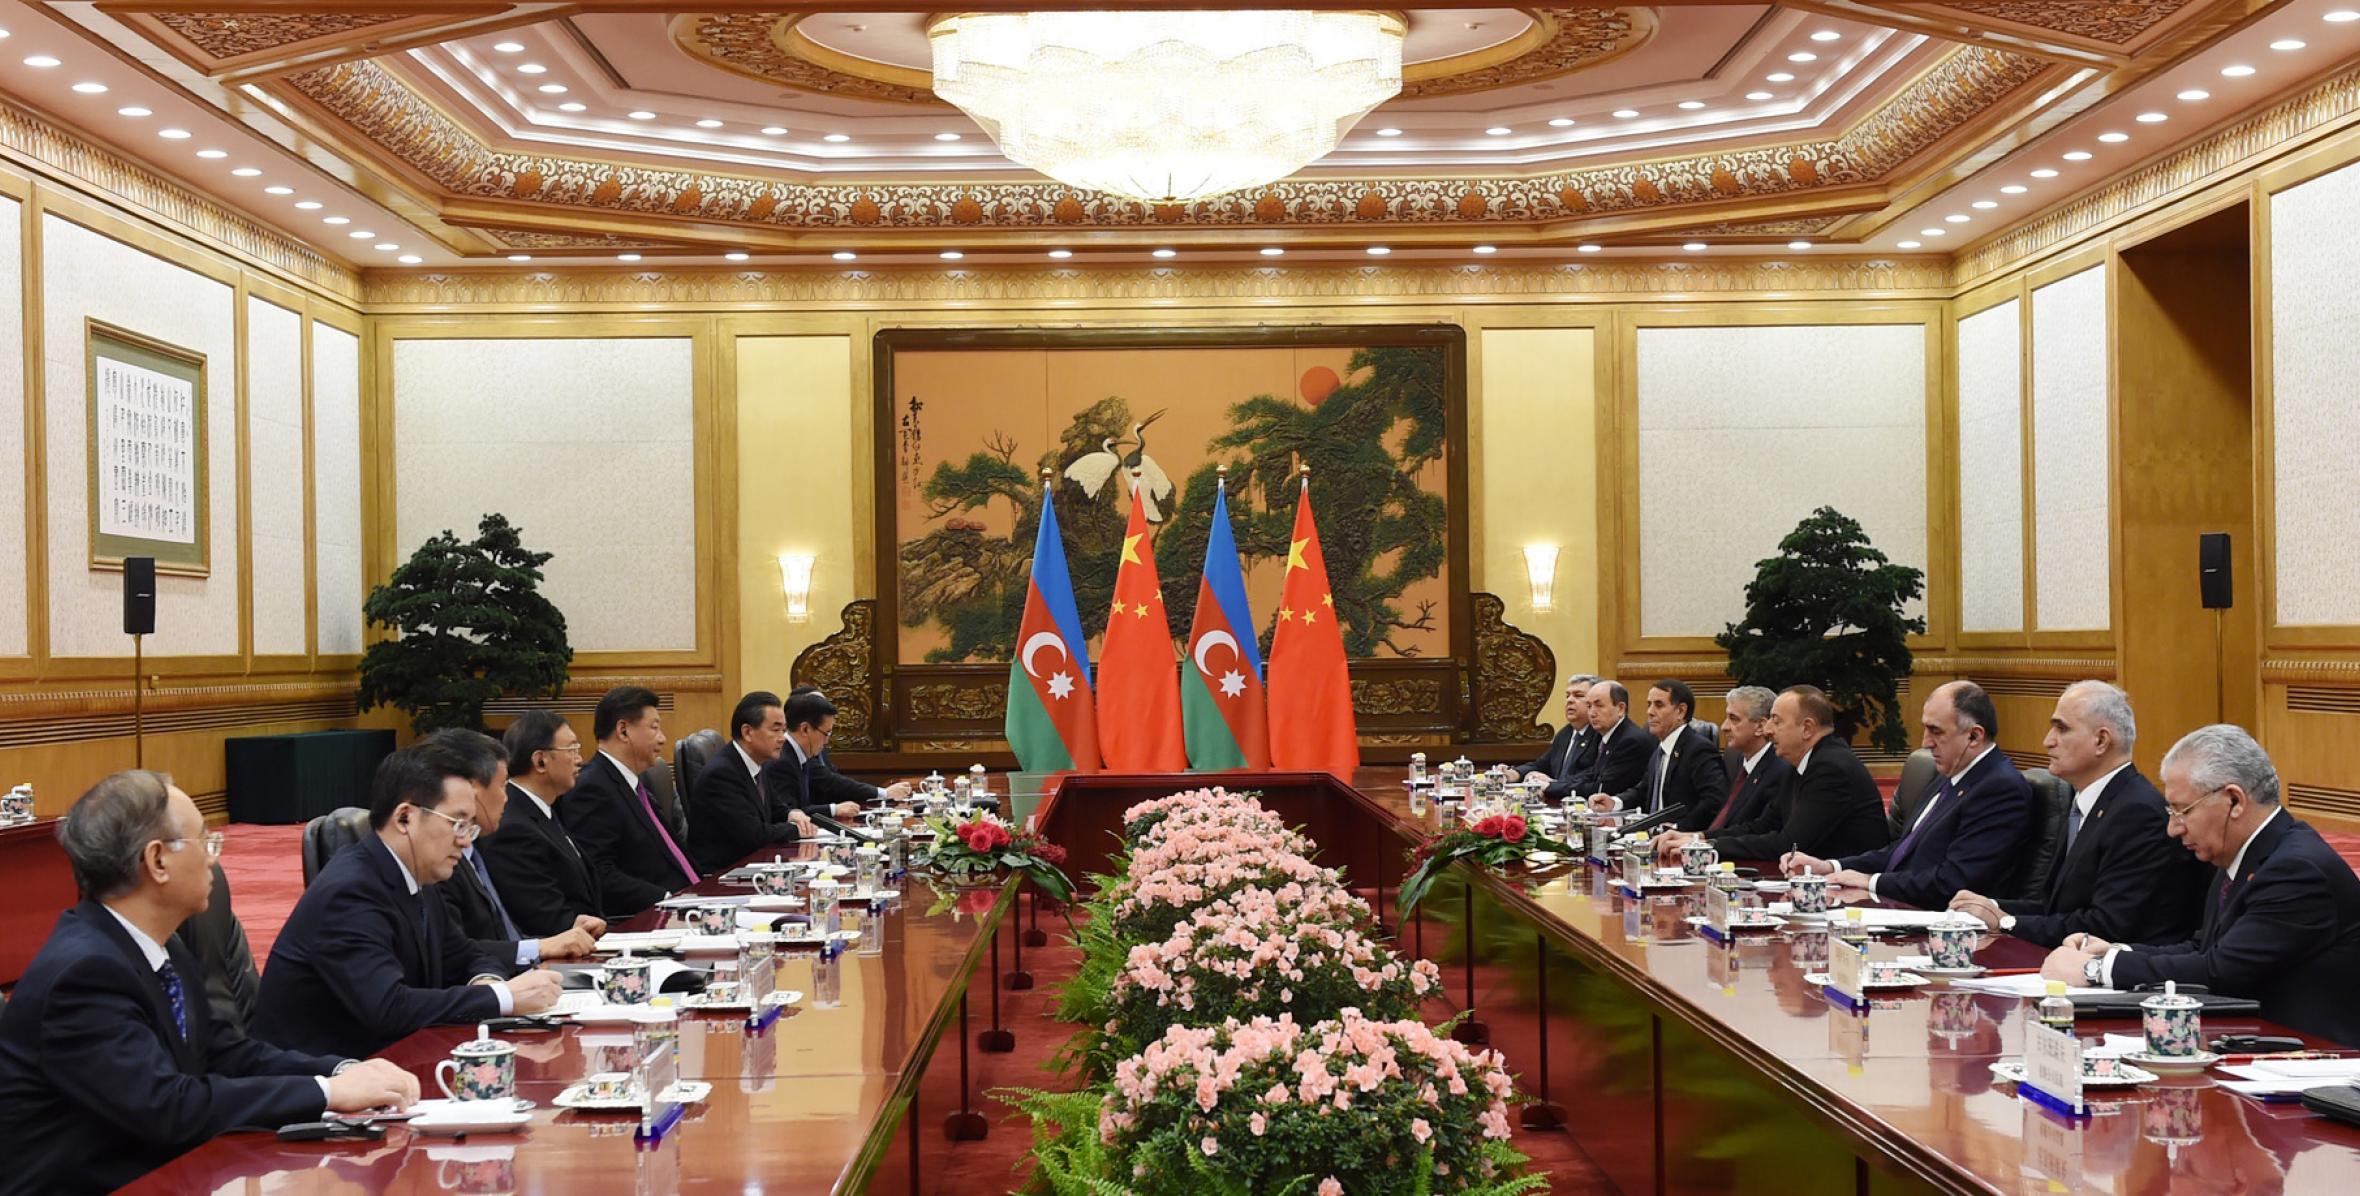 Ilham Aliyev met with President of the People's Republic of China Xi Jinping